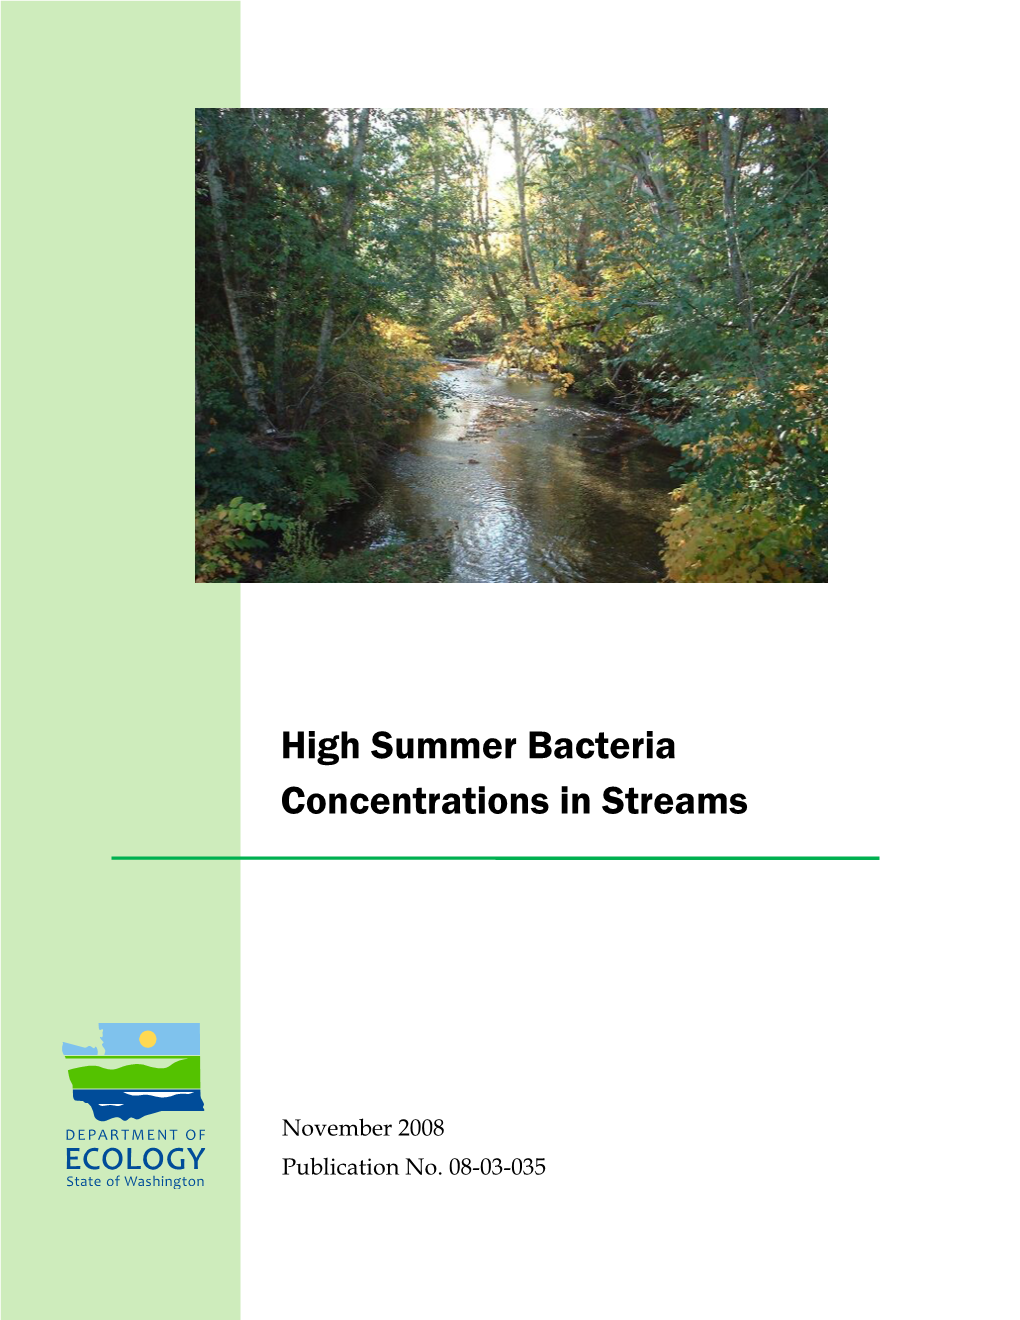 High Summer Bacteria Concentrations in Streams